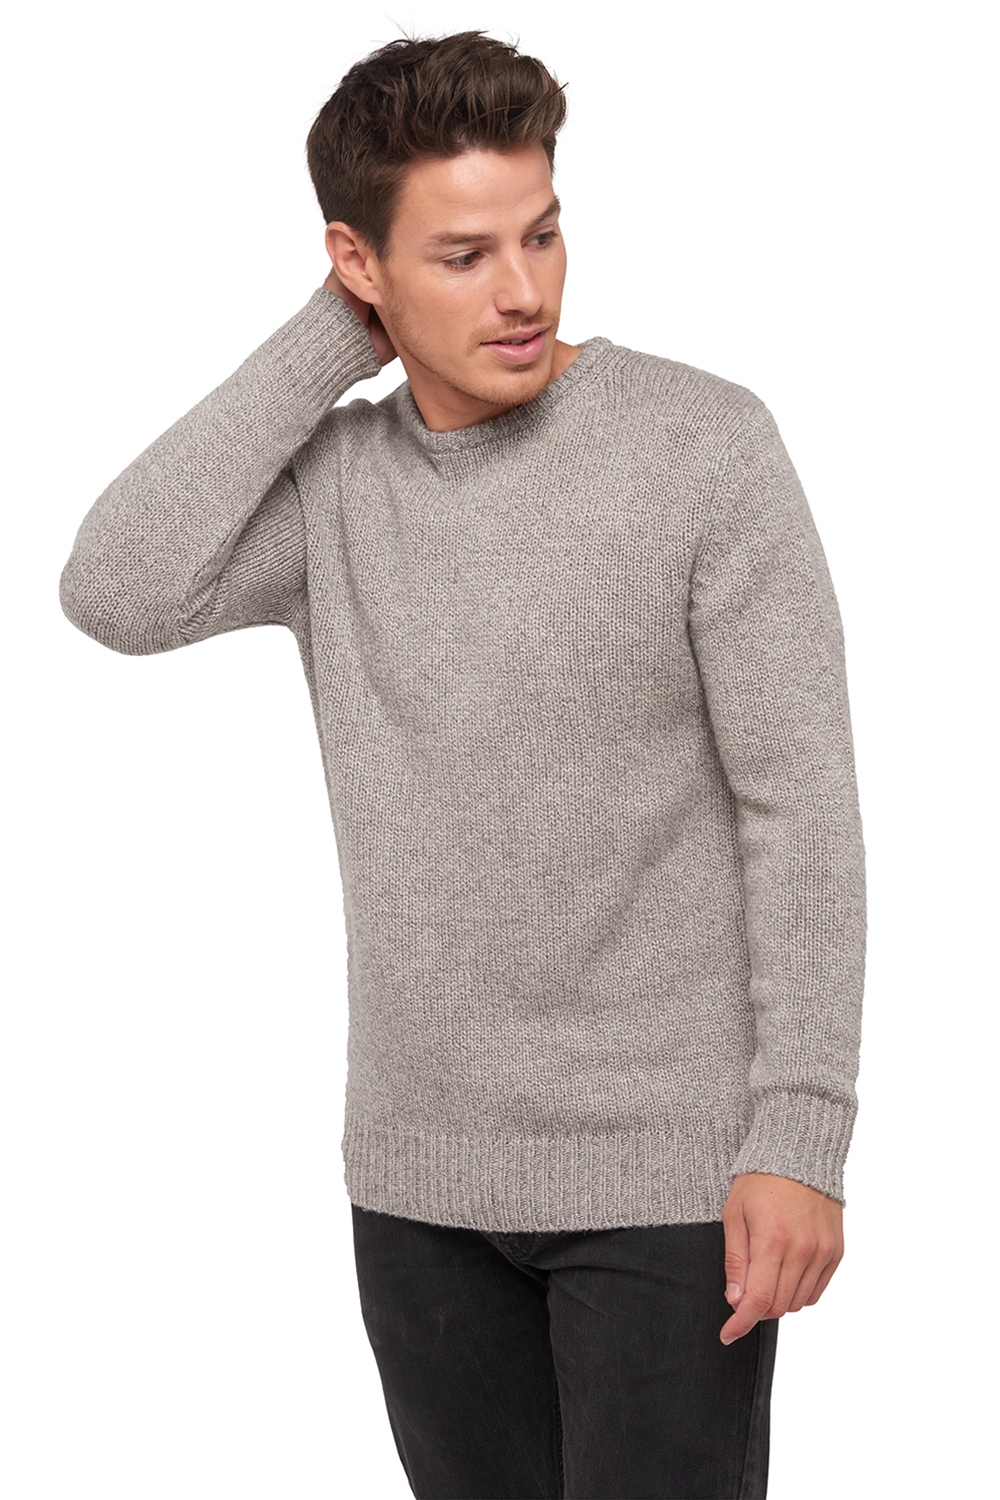 Chameau pull homme col rond cole pierre xl